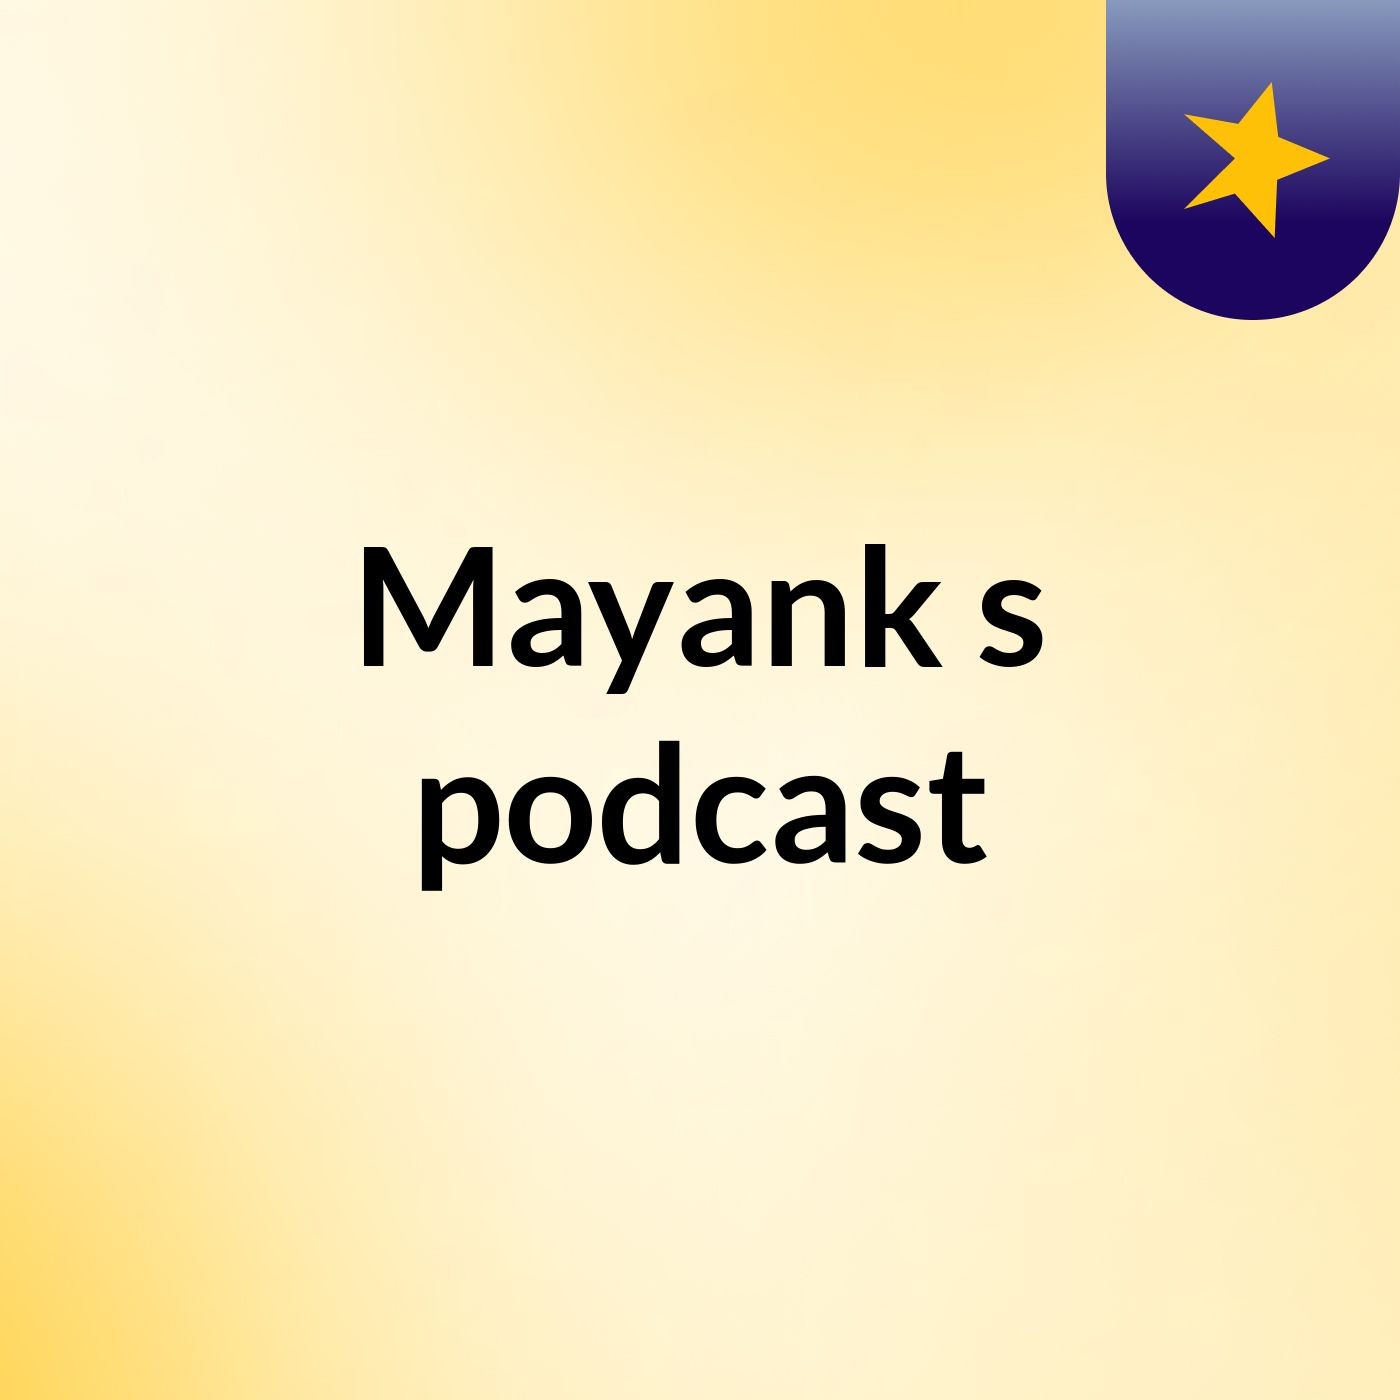 Mayank's podcast